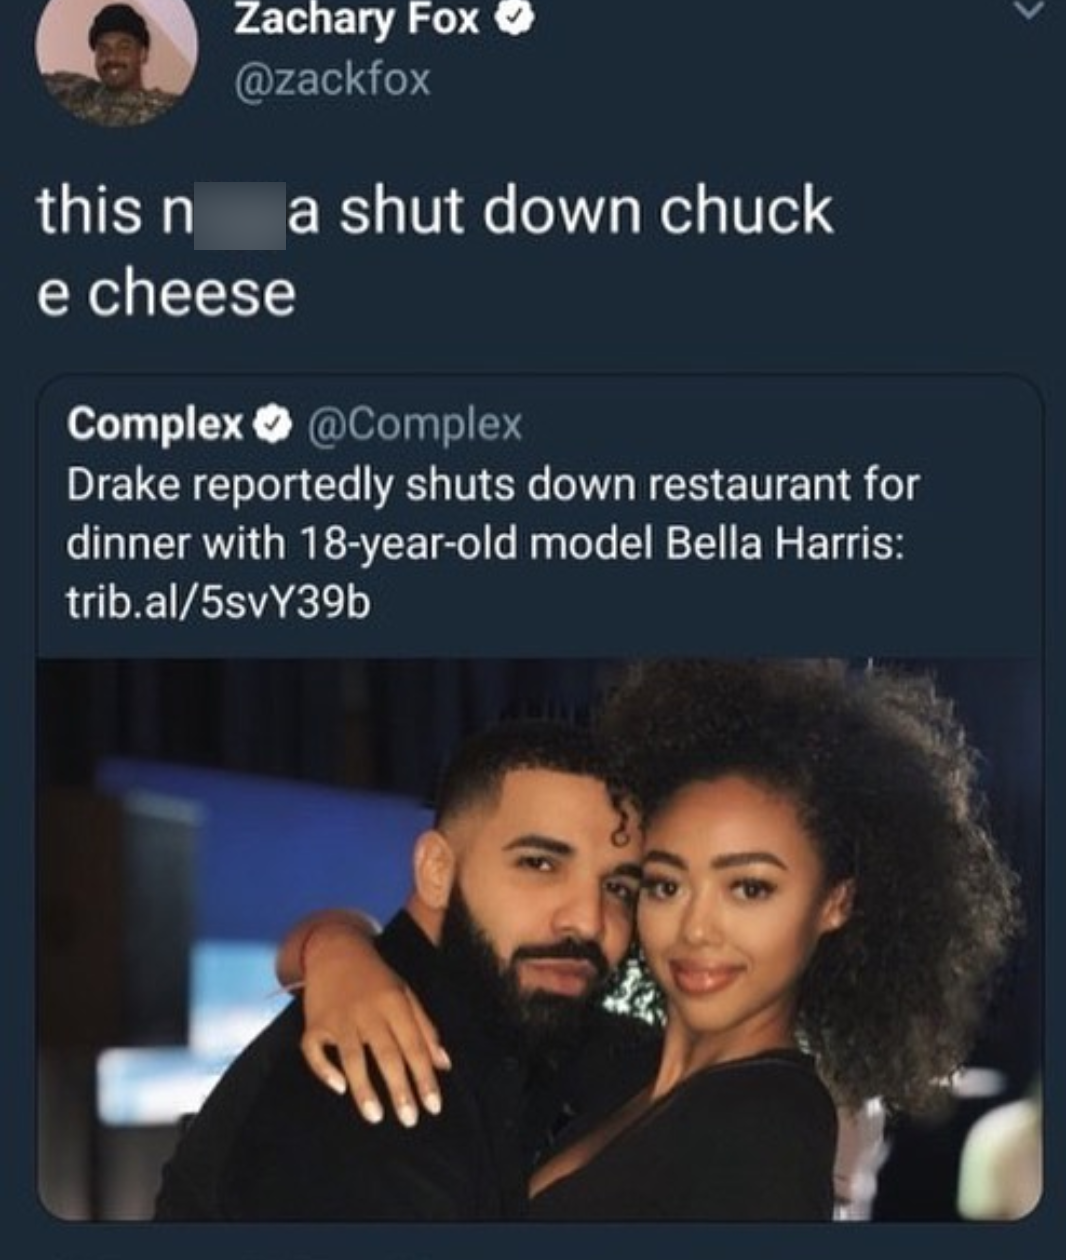 meme drake and 18 year old model - Zachary Fox this n a shut down chuck e cheese Complex Drake reportedly shuts down restaurant for dinner with 18yearold model Bella Harris trib.al5svY39b